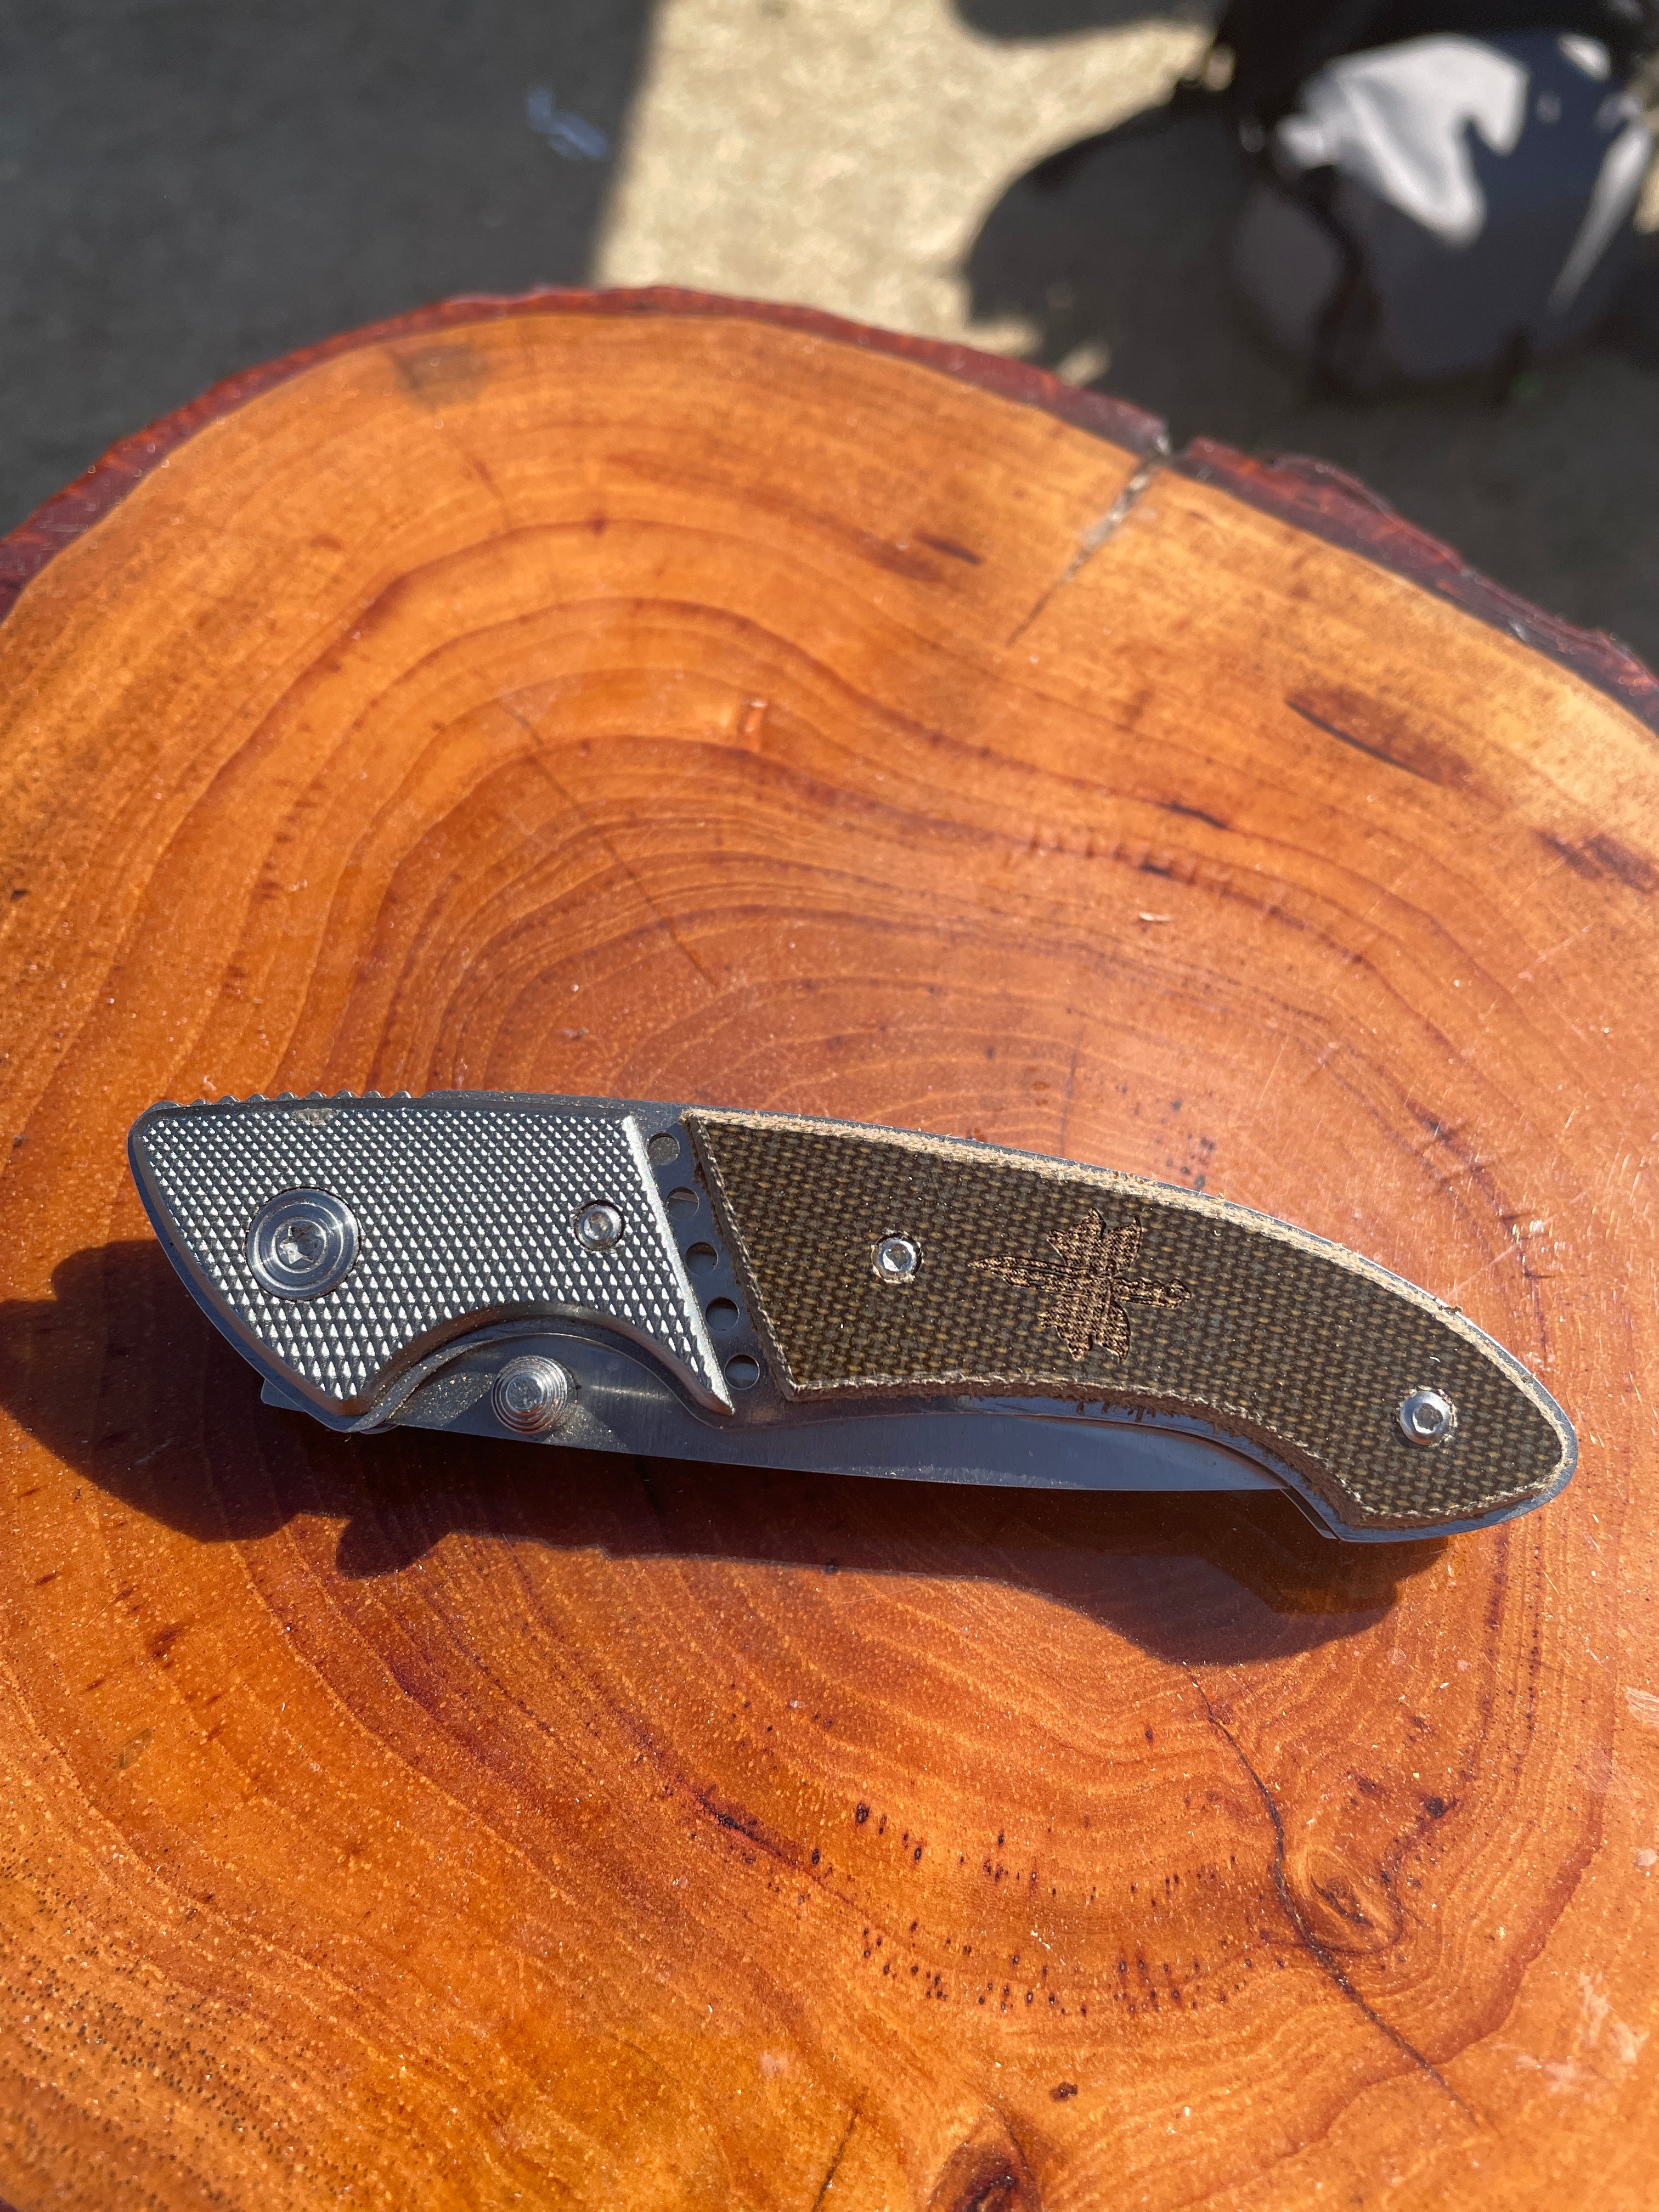 Folding knife with brown ref micarta